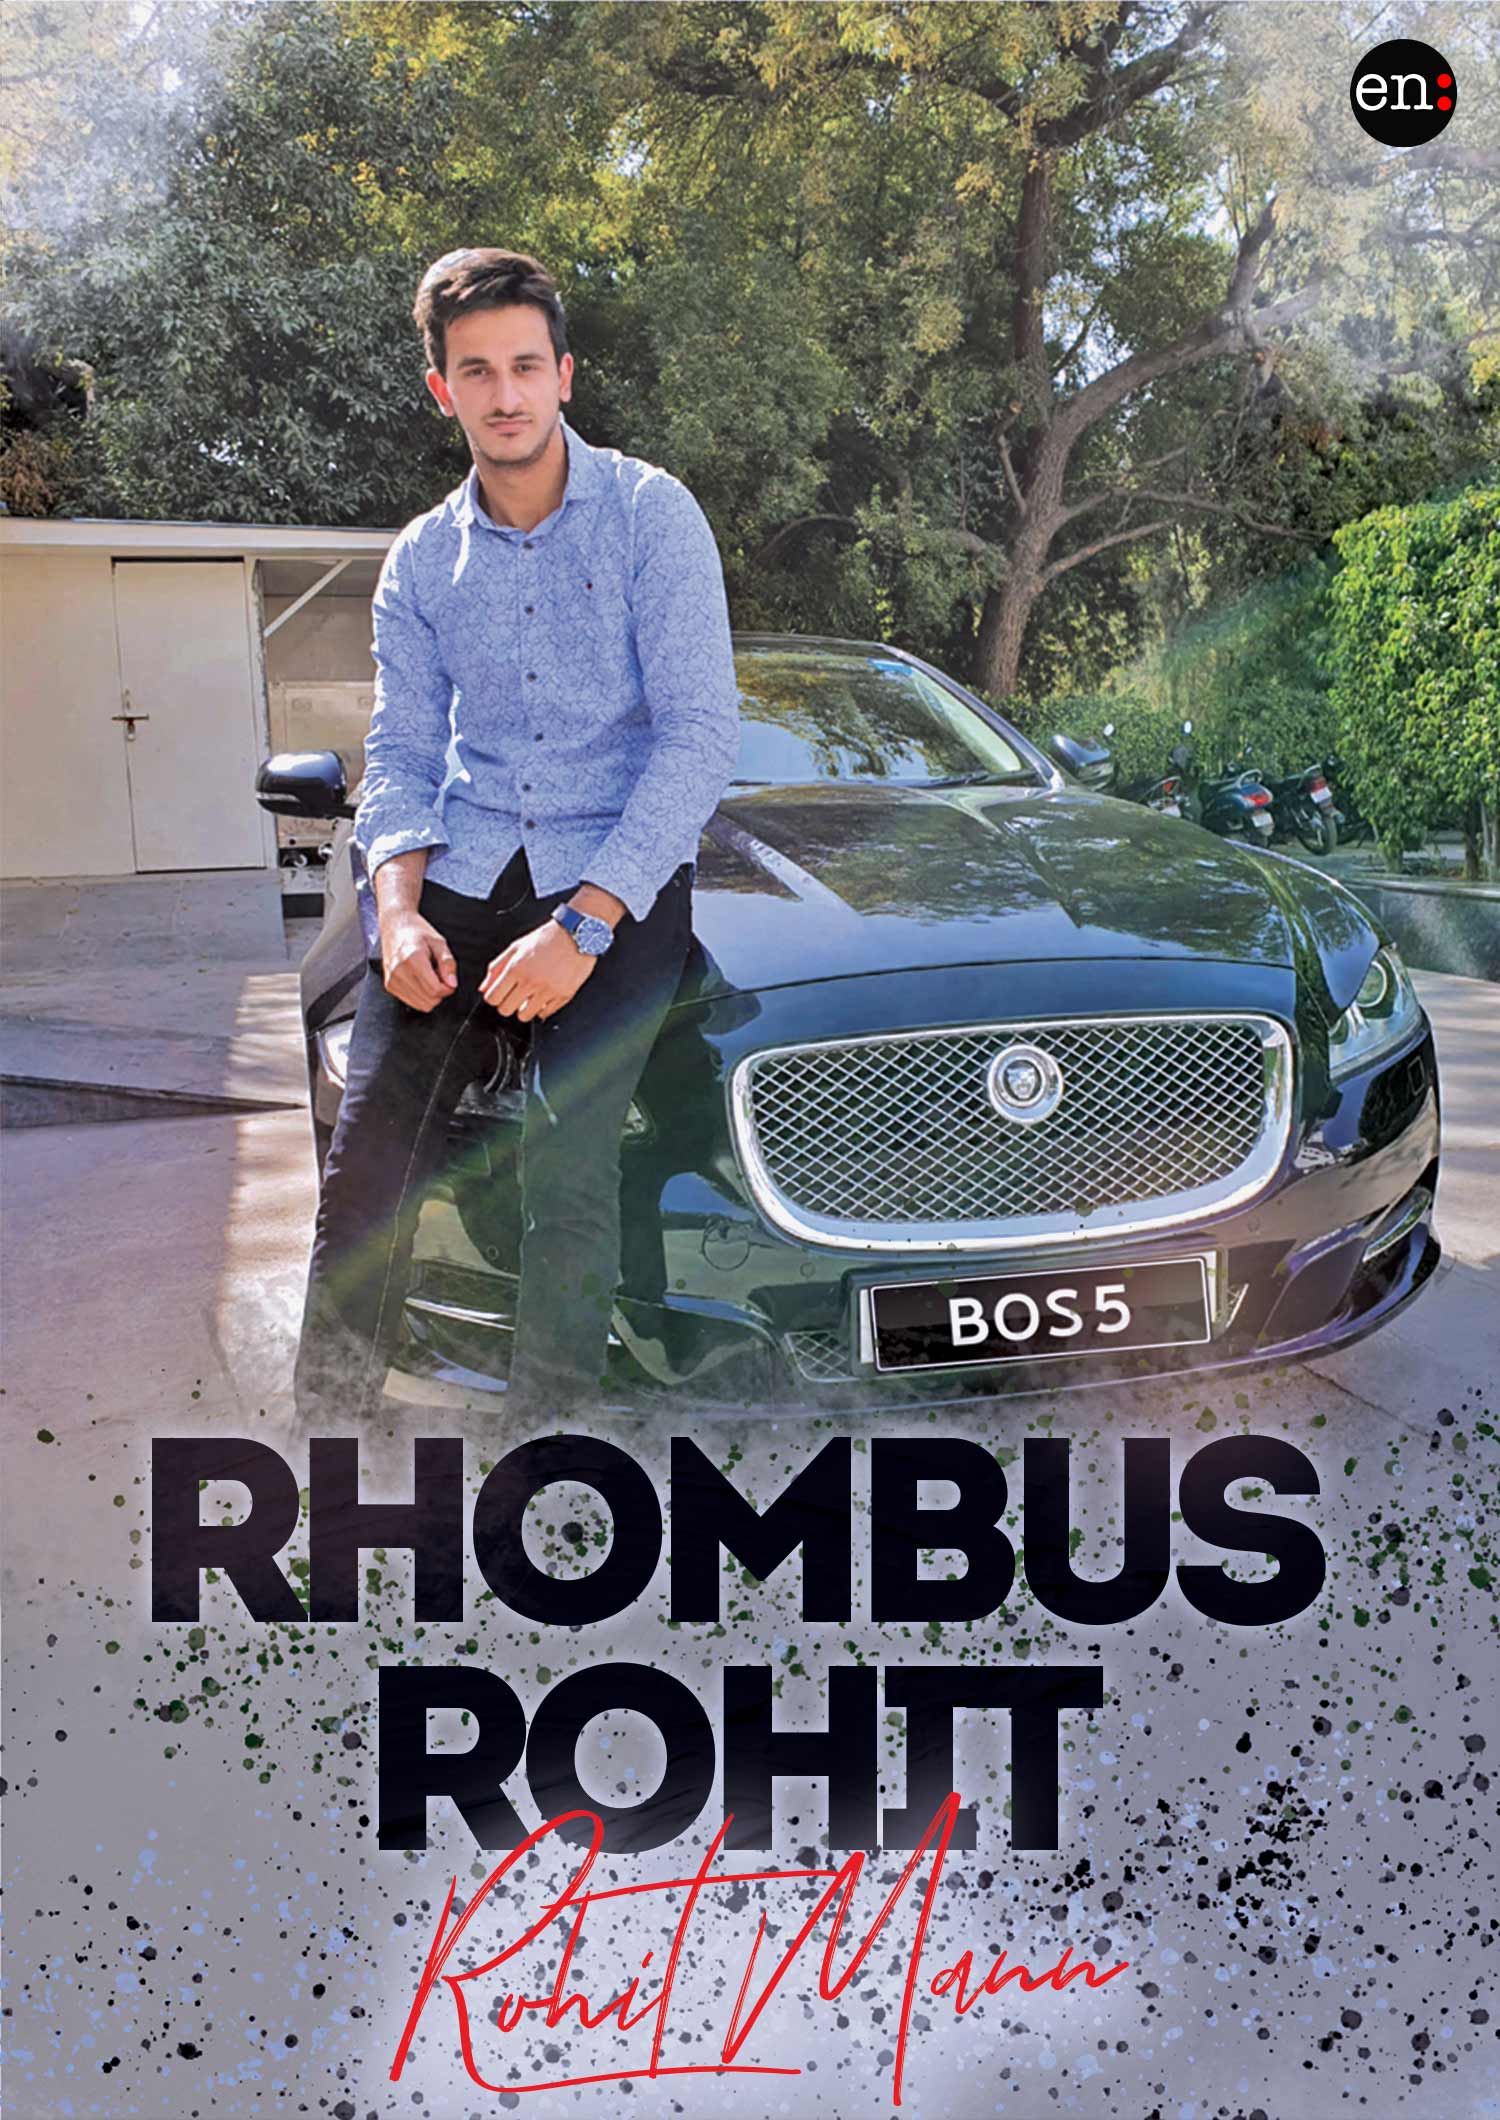 Rhombus Rohit - Contact Number, Phone Number, Mobile Number, Whatsapp Number, Email Address and Website